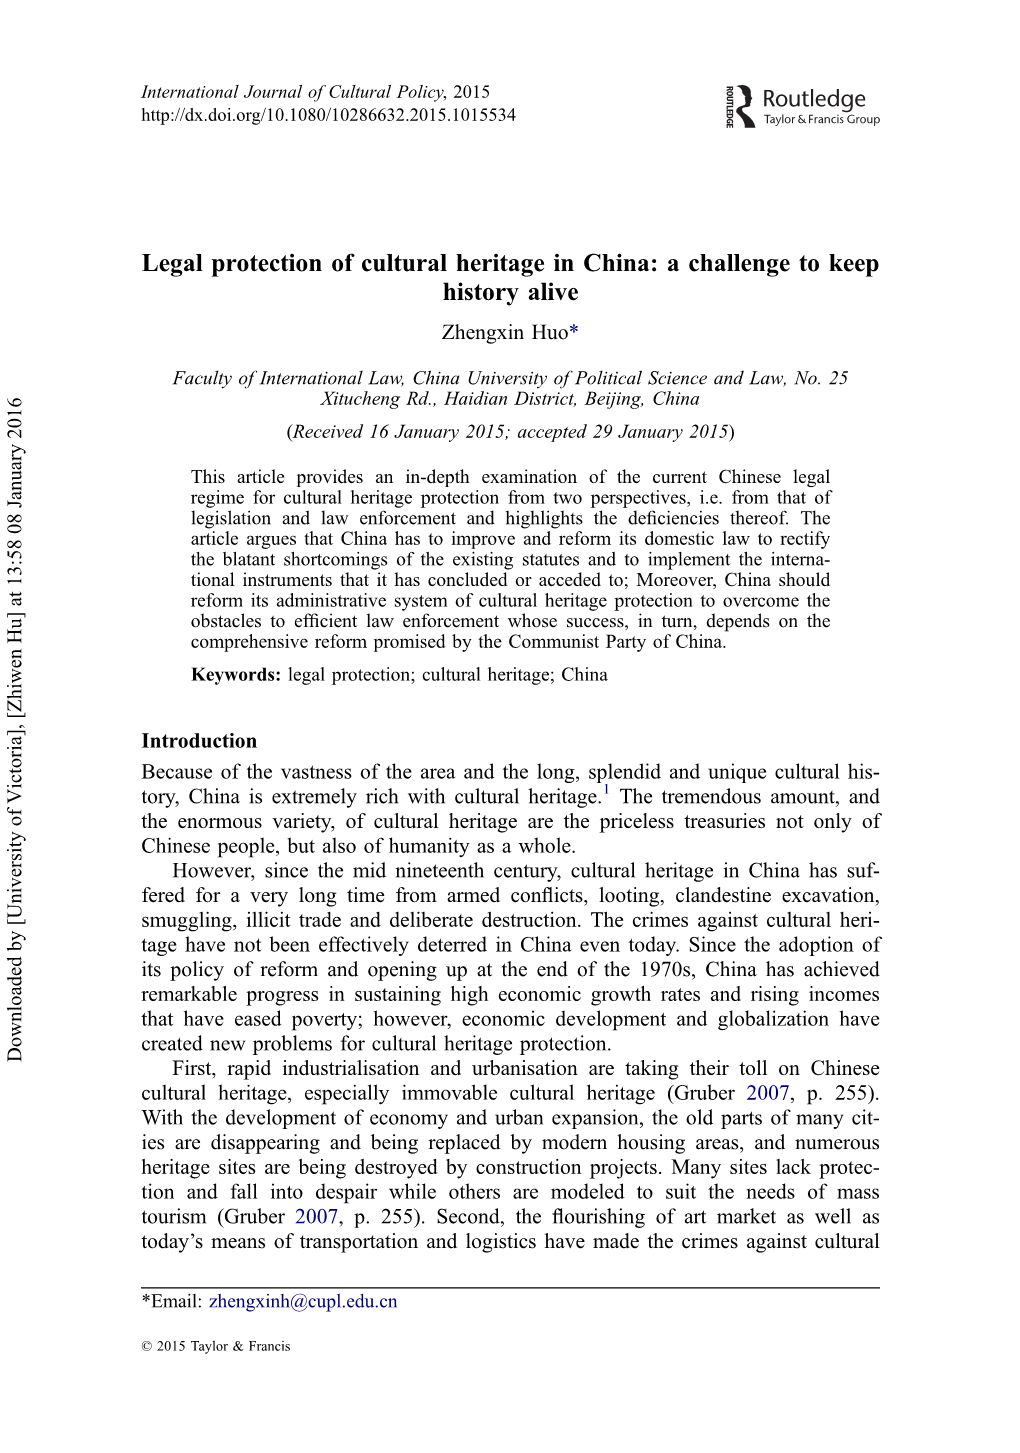 Legal Protection of Cultural Heritage in China: a Challenge to Keep History Alive Zhengxin Huo*